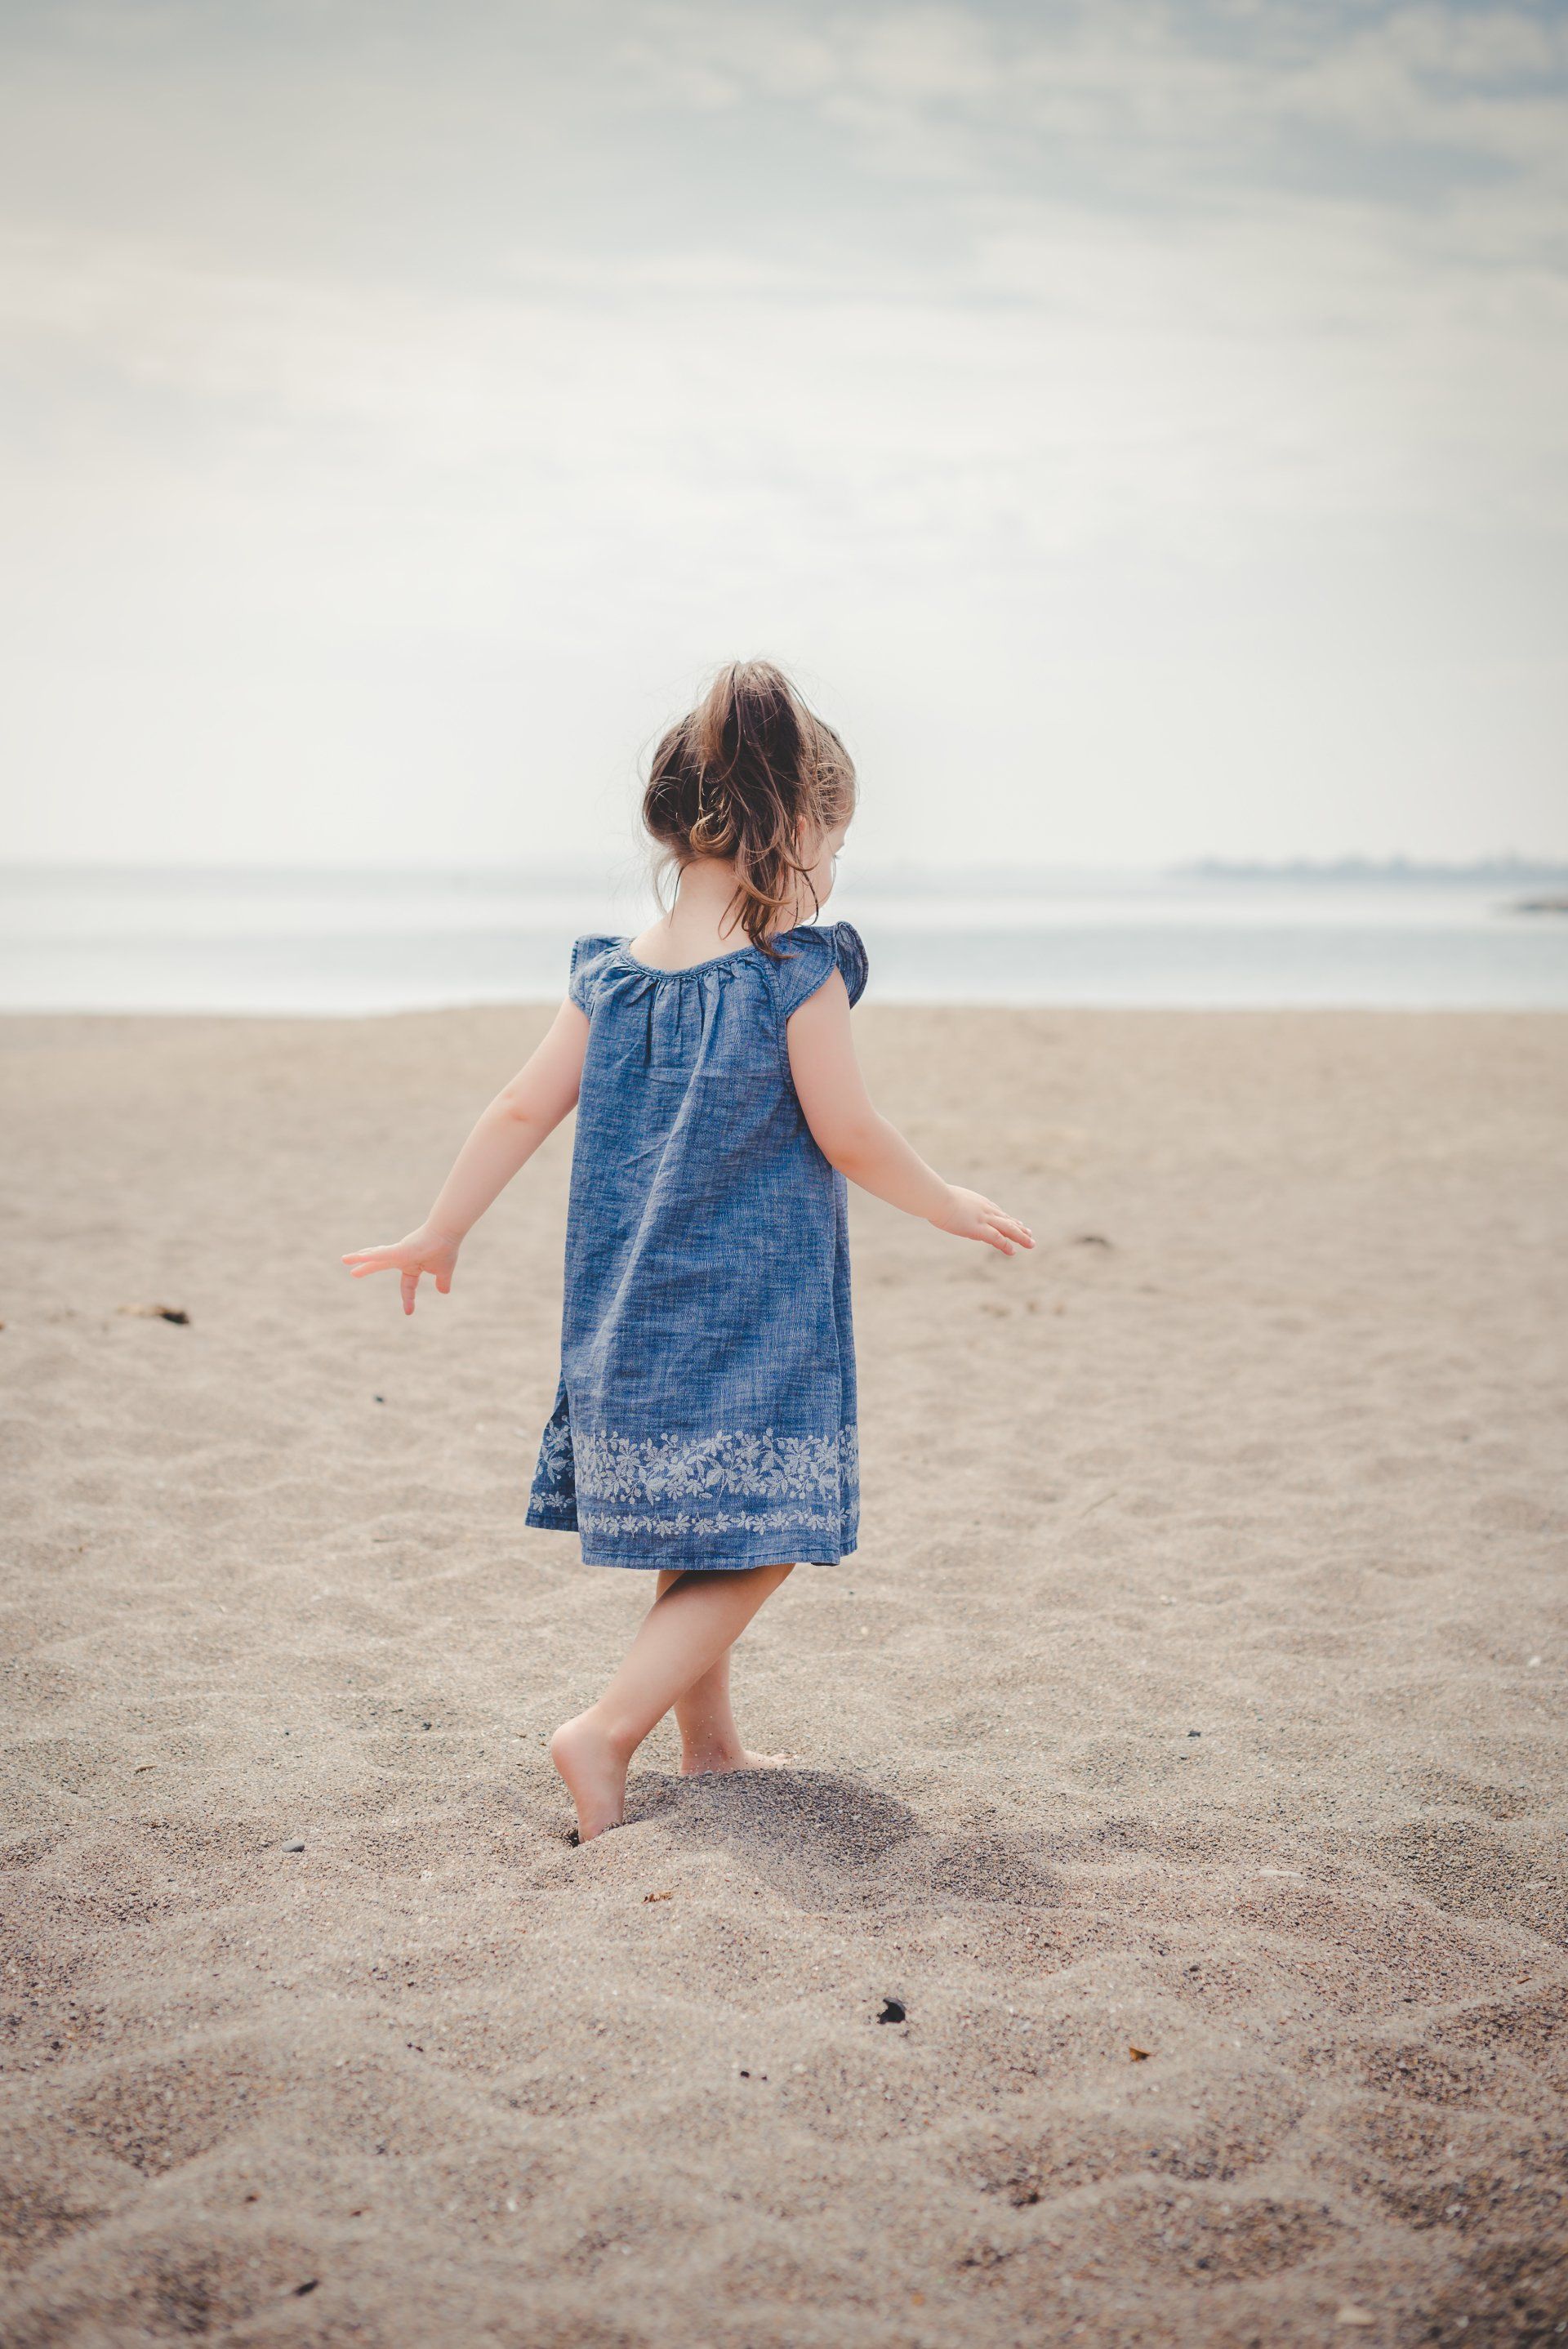 Young girl on beach |  Child photography | Stacey Naglie Toronto